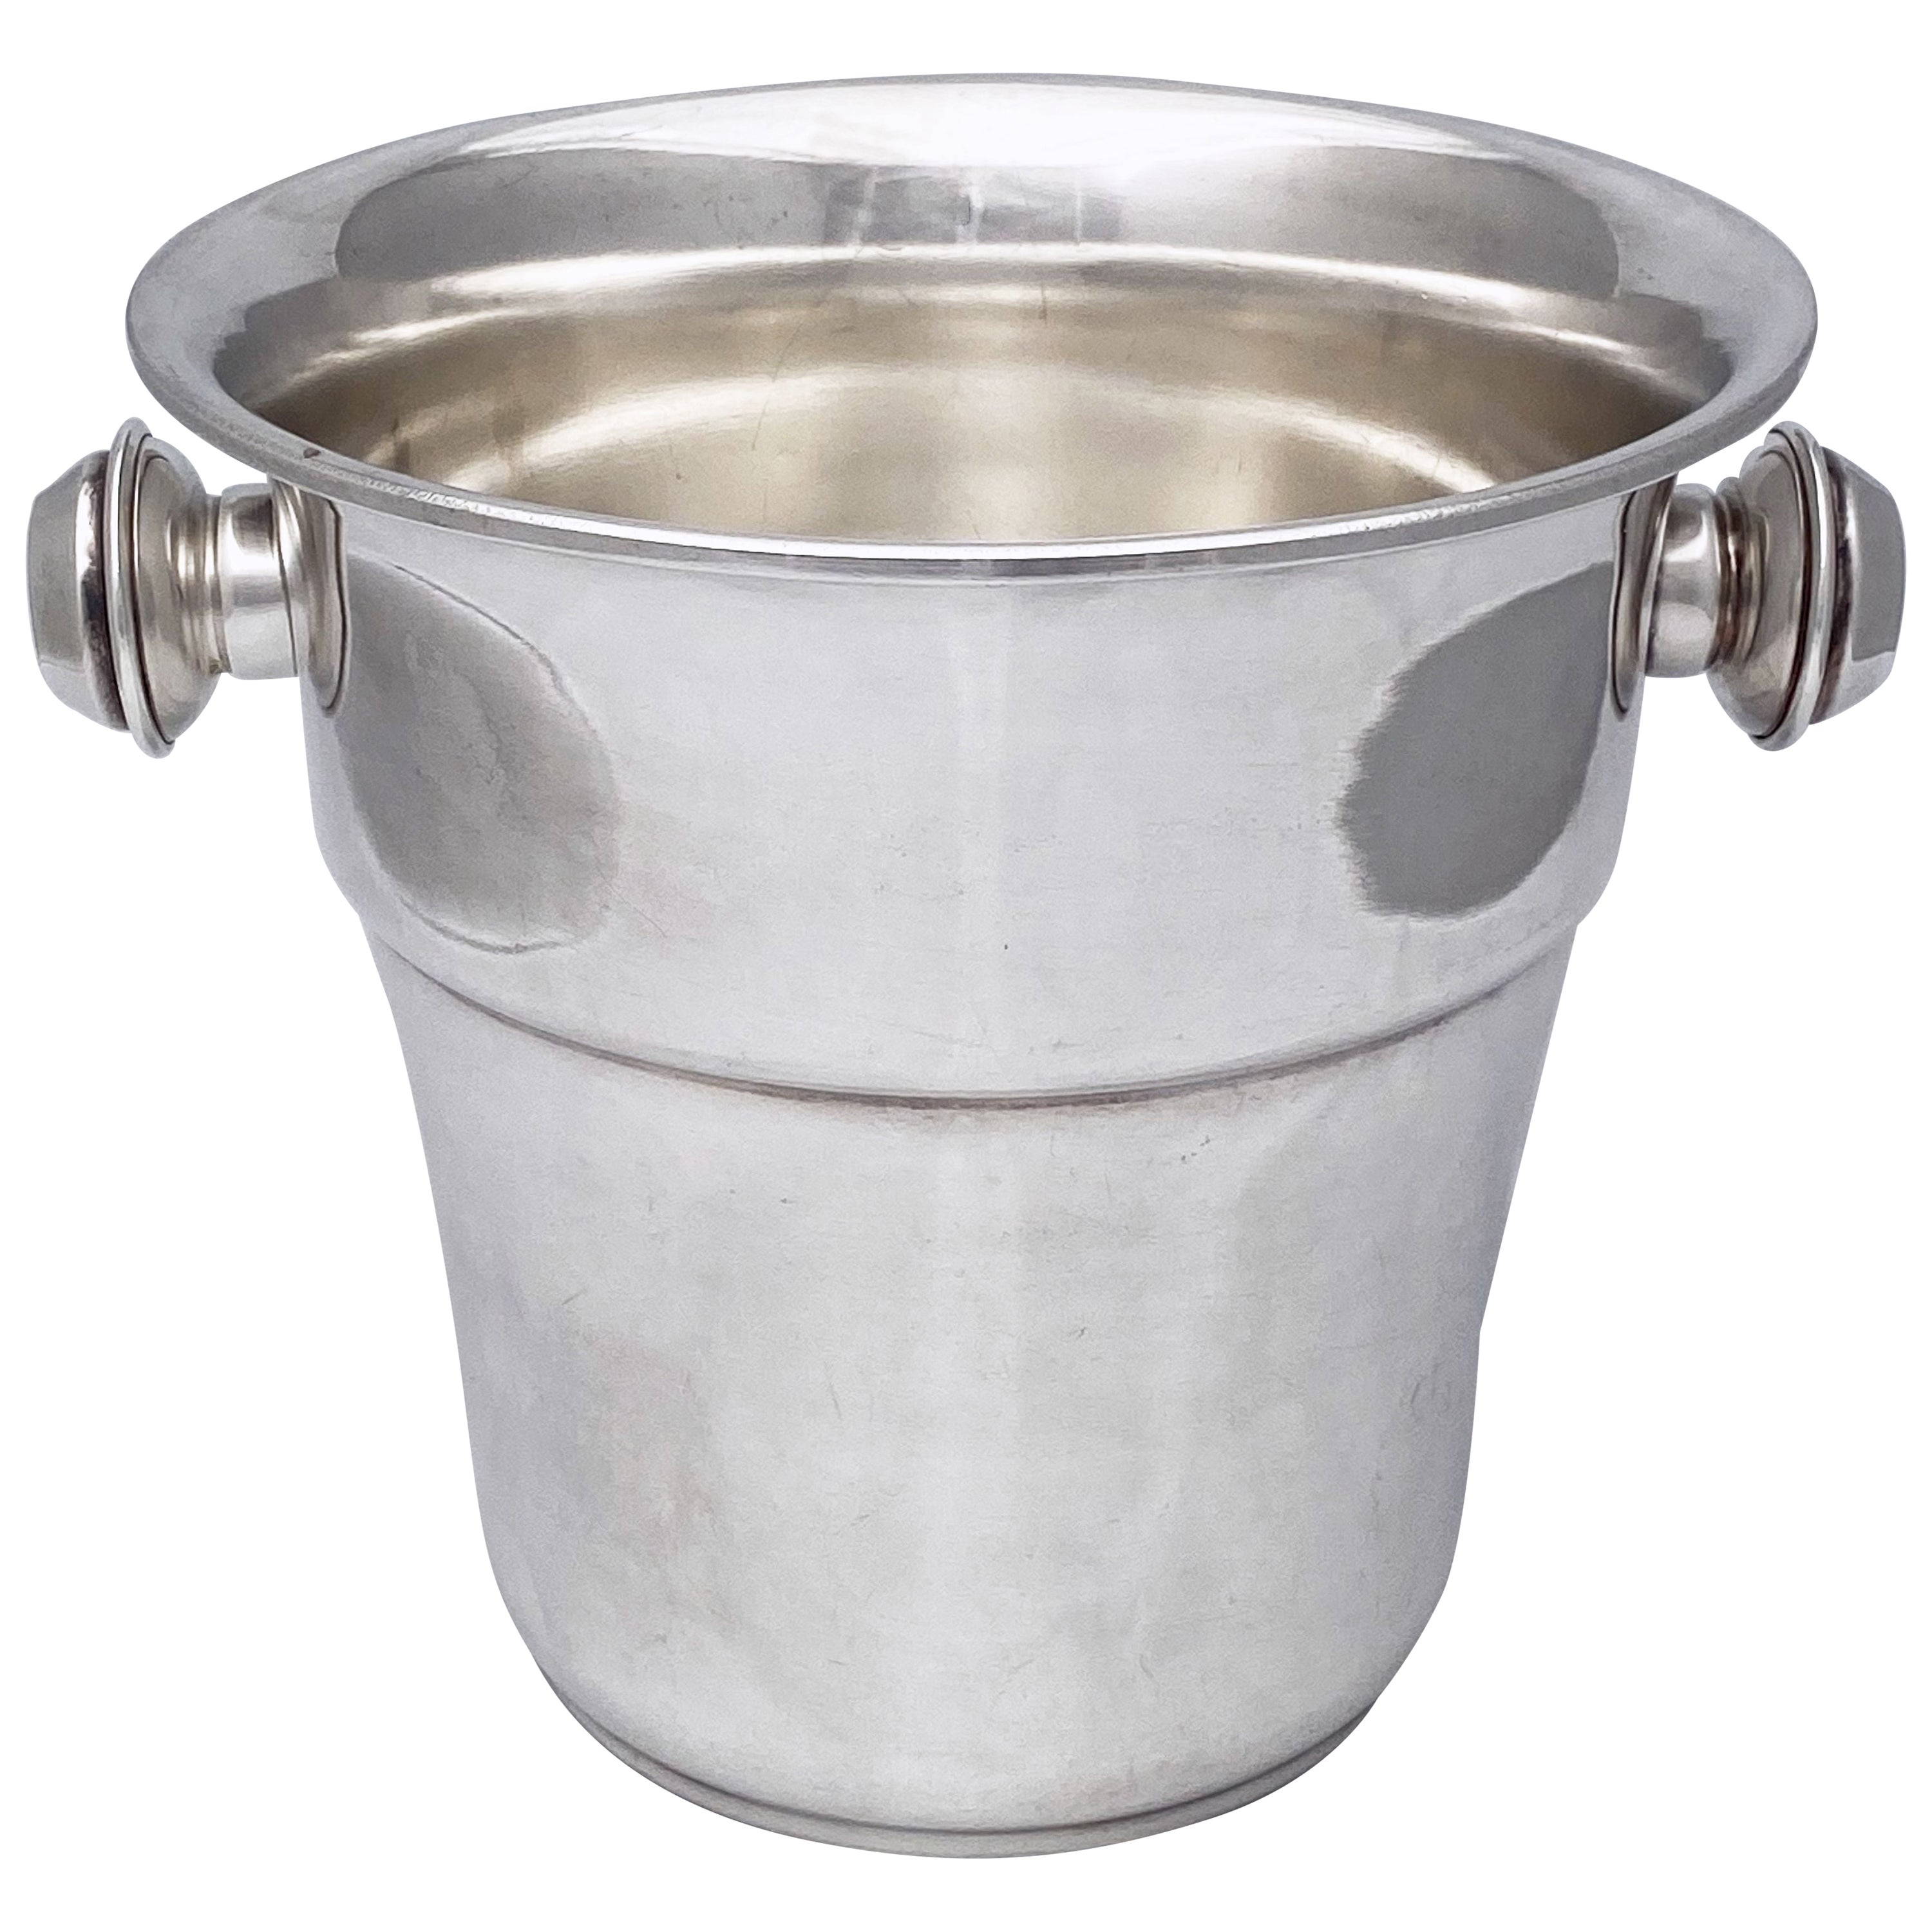 English Wine Cooler or Champagne Bucket